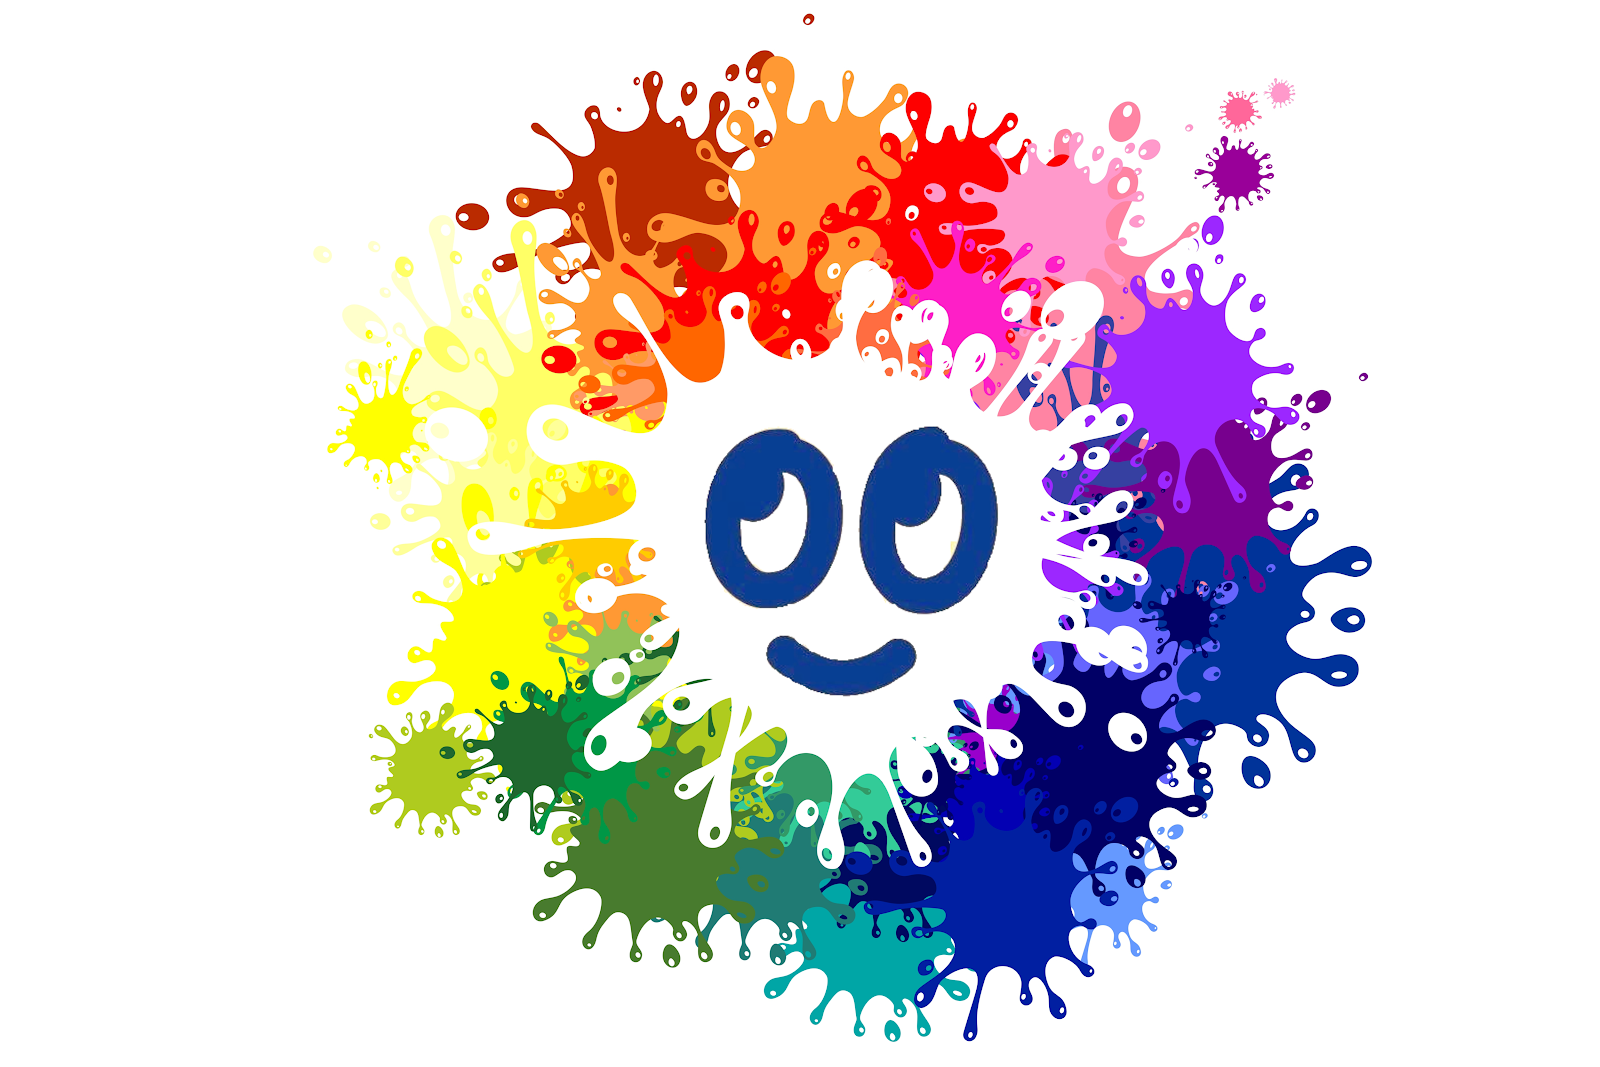 Color wheel splatter with Creativity School logo in the middle.